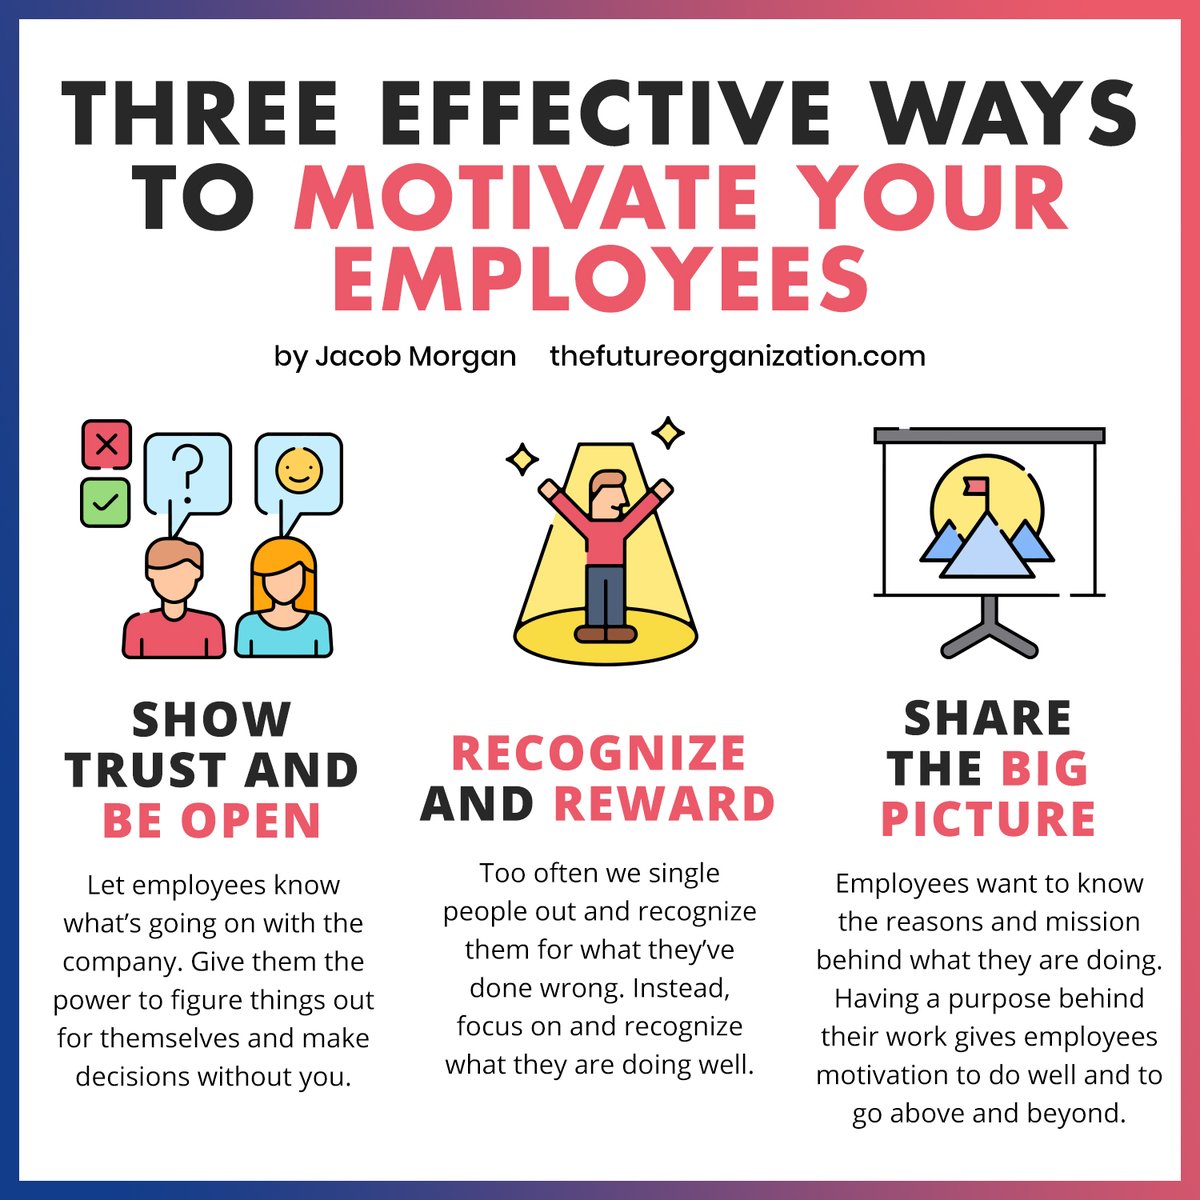 Did you know 85% of employees perform better when they're motivated? Proper motivation boosts their performance significantly. Yet, many companies still miss the mark on effective motivation strategies. Here are a few ideas on how to motivate your team.